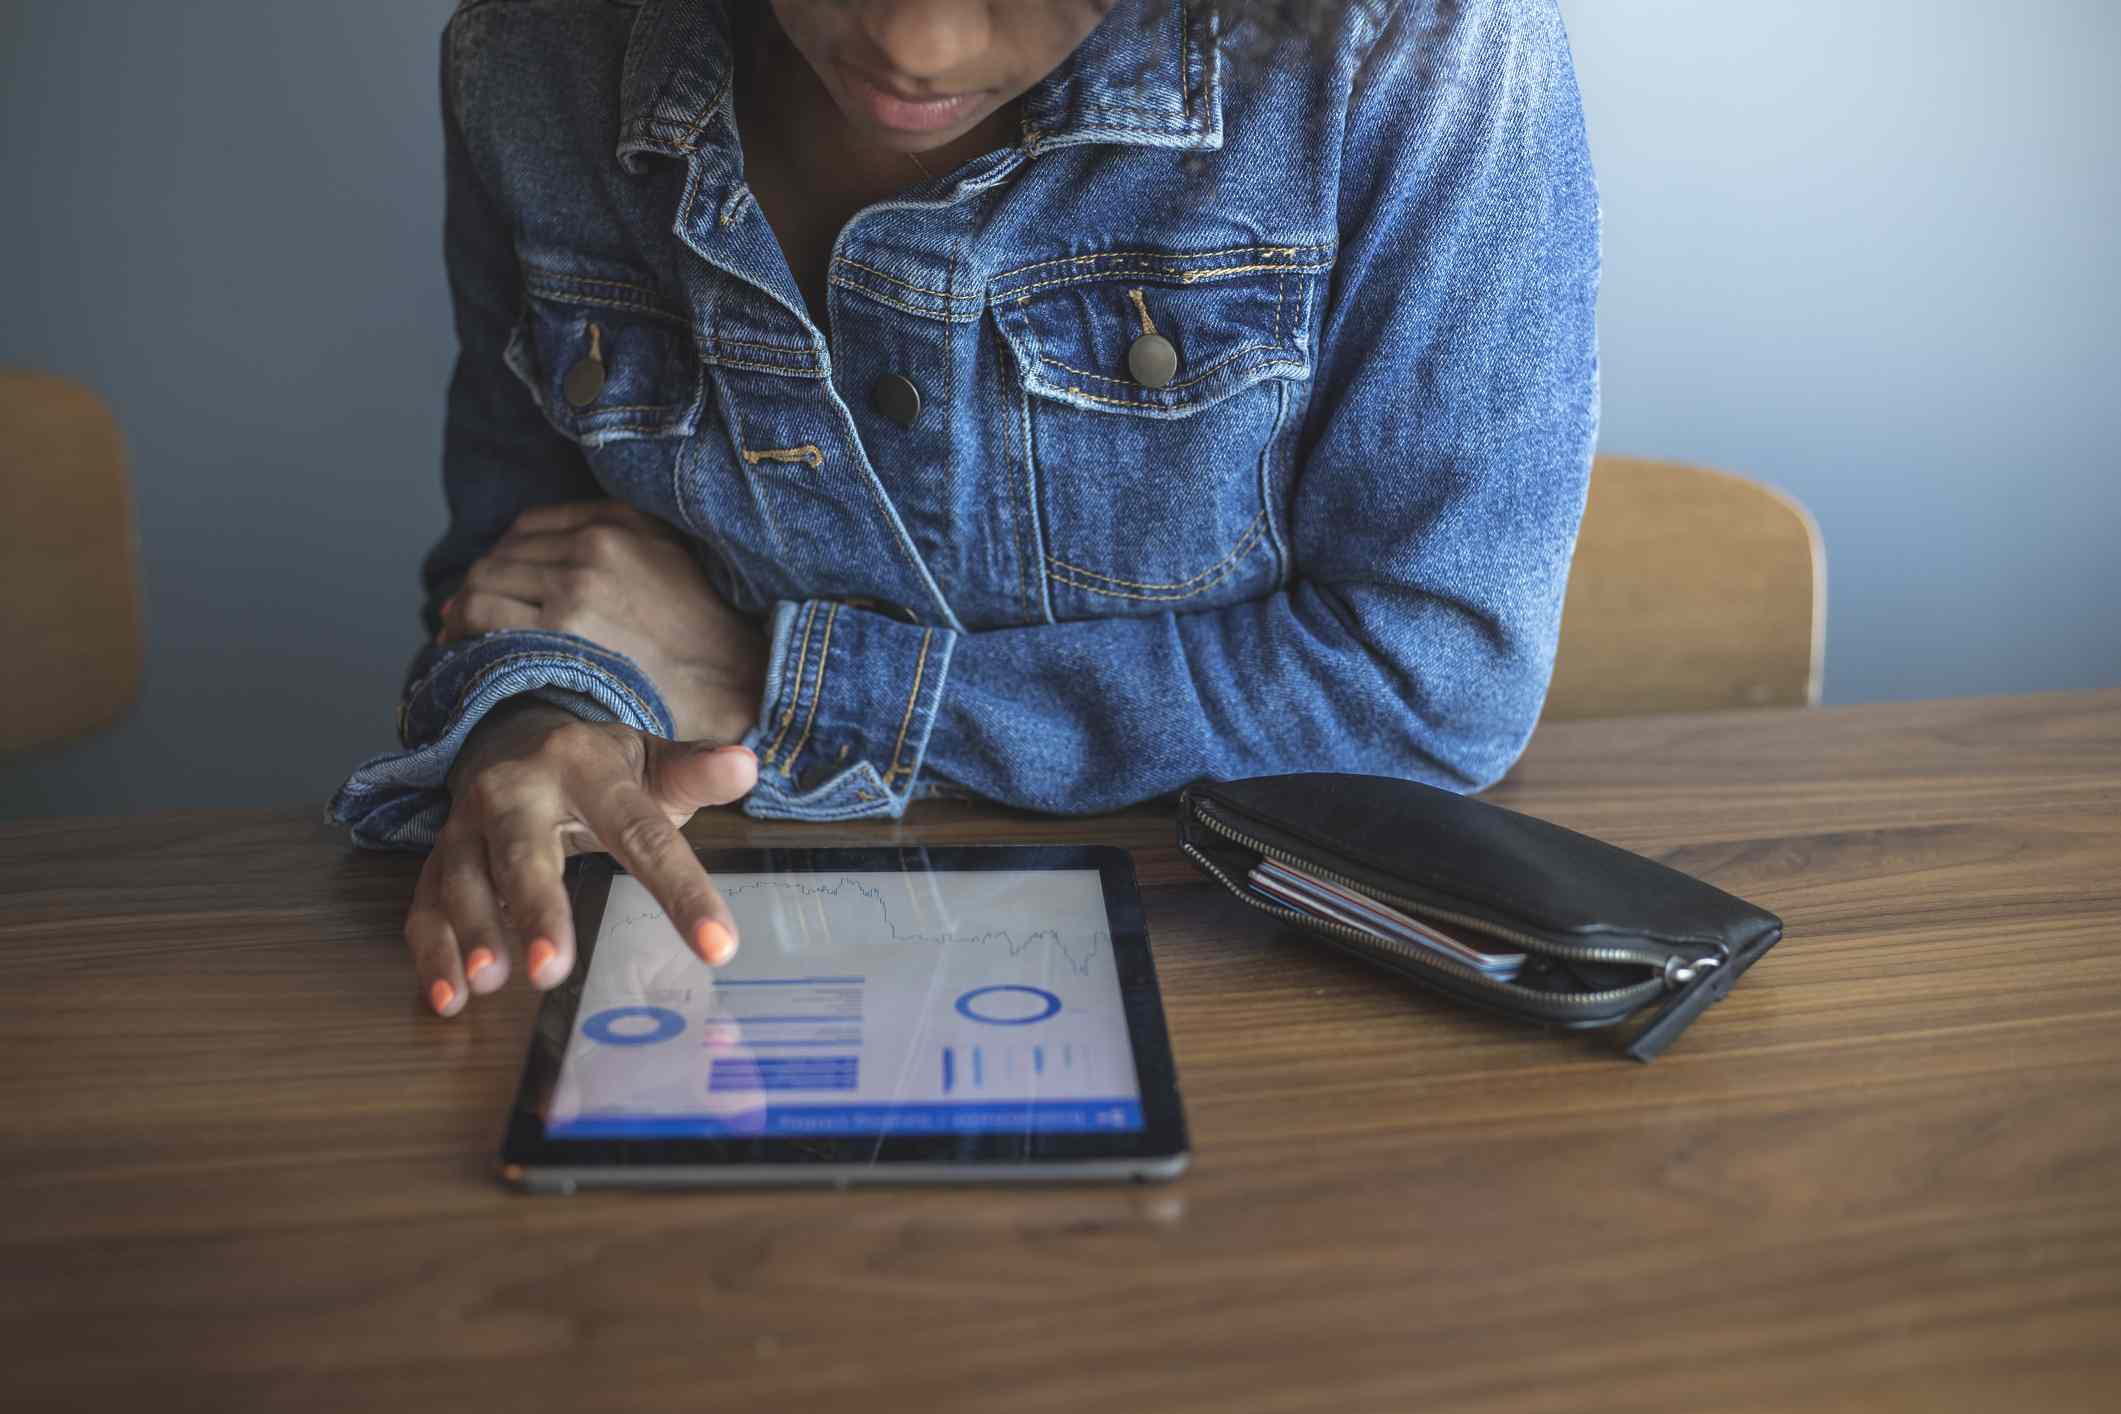 A young woman reviews her portfolio on a tablet